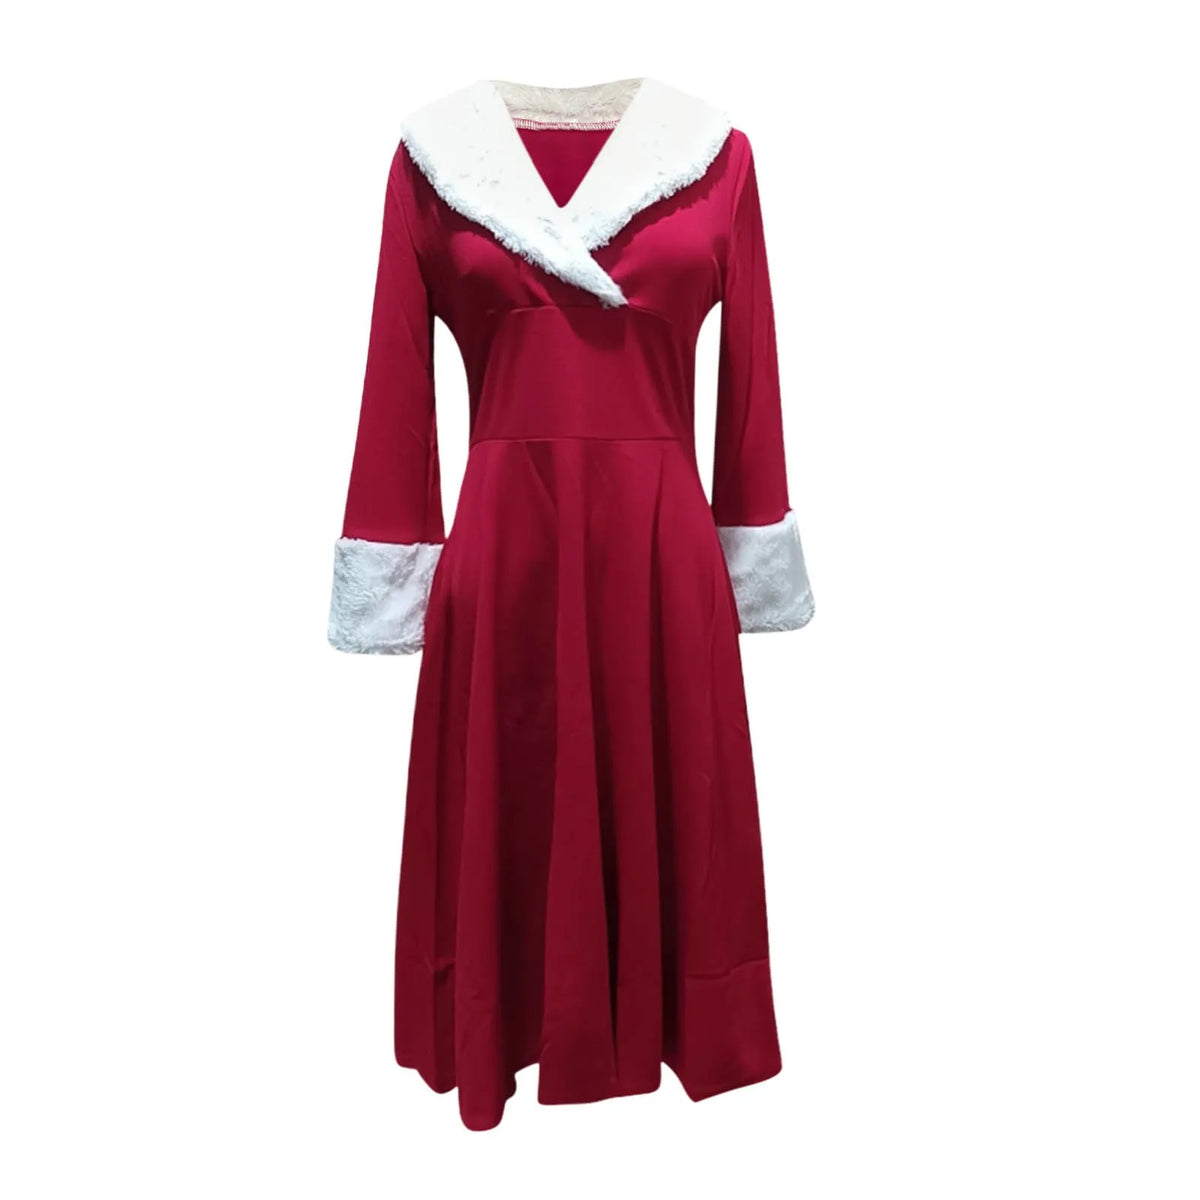 New Year Christmas Dress Women Christmas Sexy Costume Long Sleeve V Neck Plush Warm Party Pleated Tunic Swing Dresses